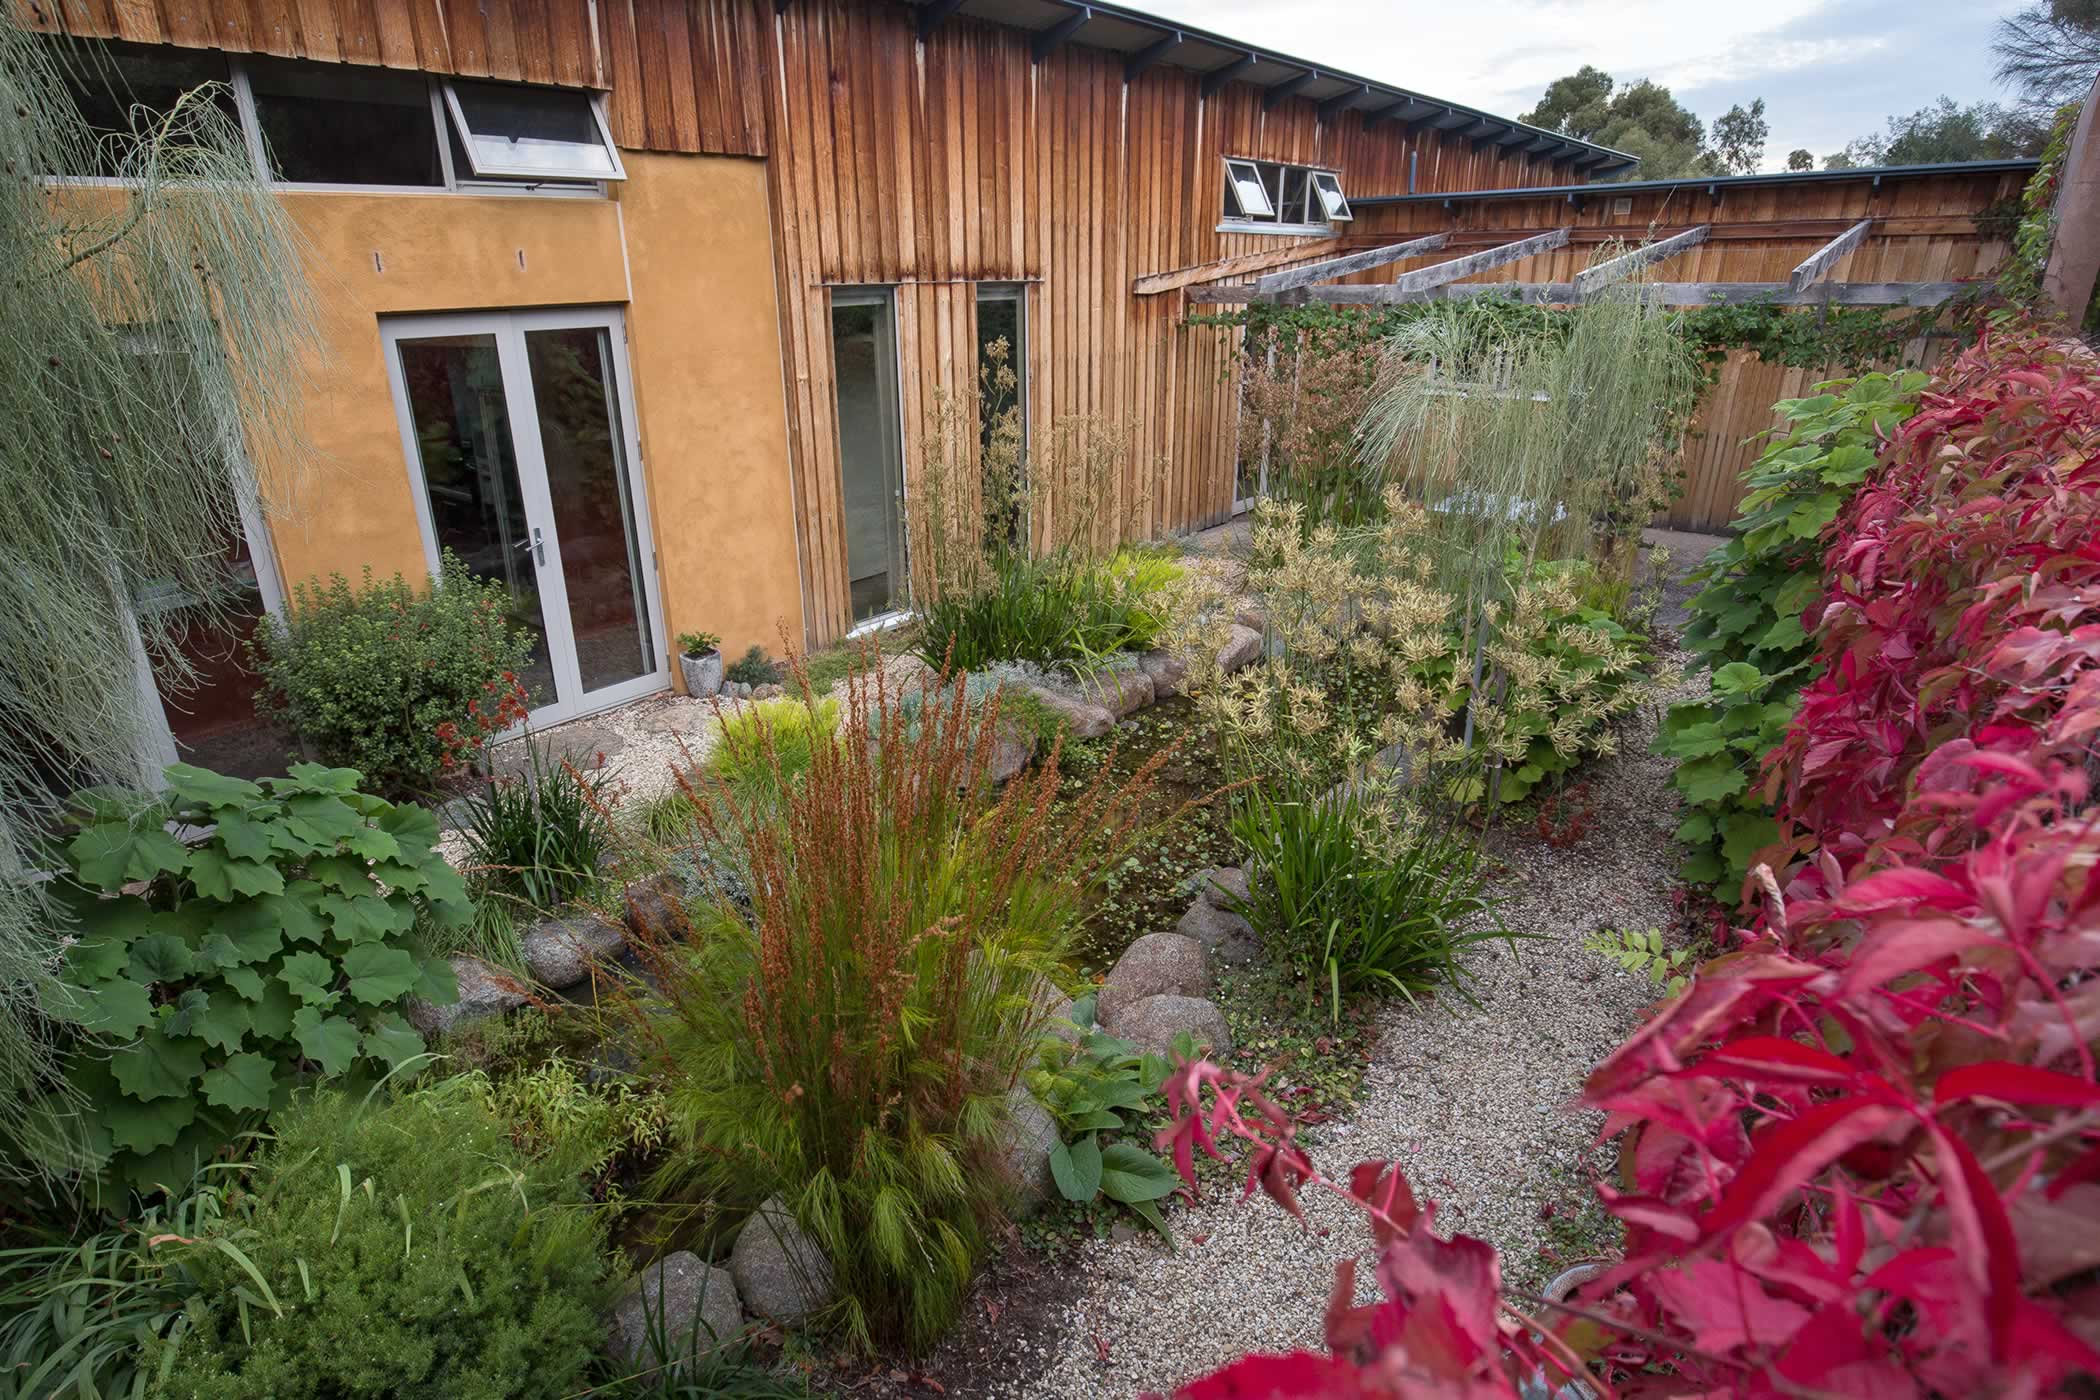 Manuka Road Courtyard Garden, Kettering, Tasmania: A lushly planted sunken garden resolves arrival and passive solar gain into the residence from the north on a site that slopes towards spectacular views to the south. Photo by Thomas Ryan.